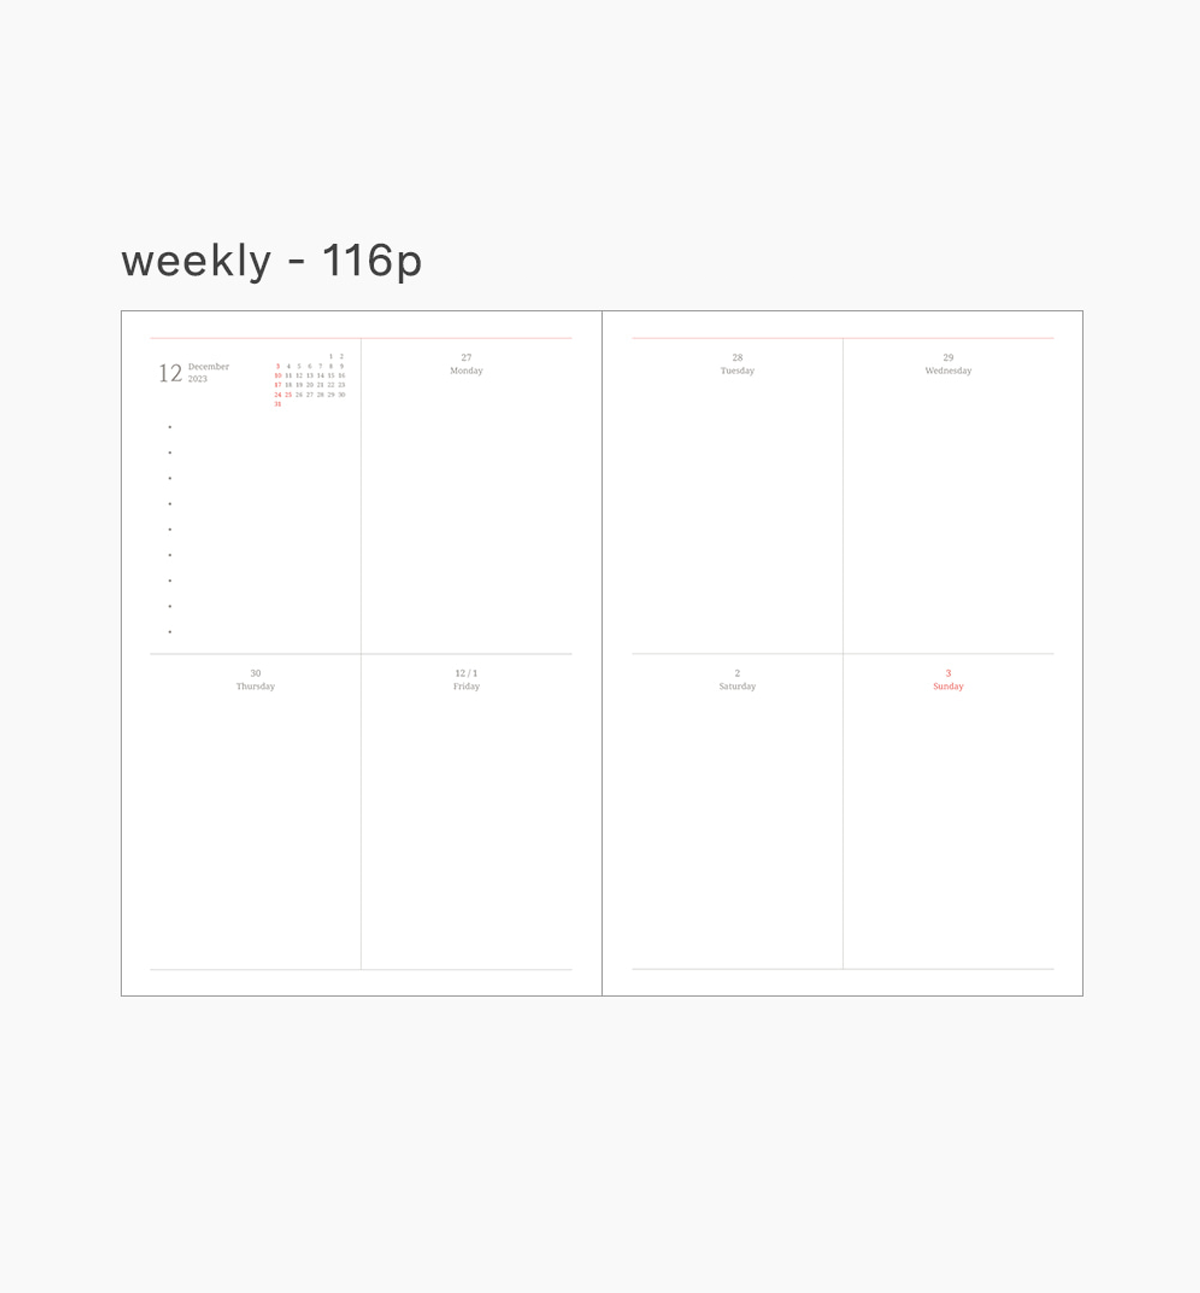 2024 Object Weekly Planner